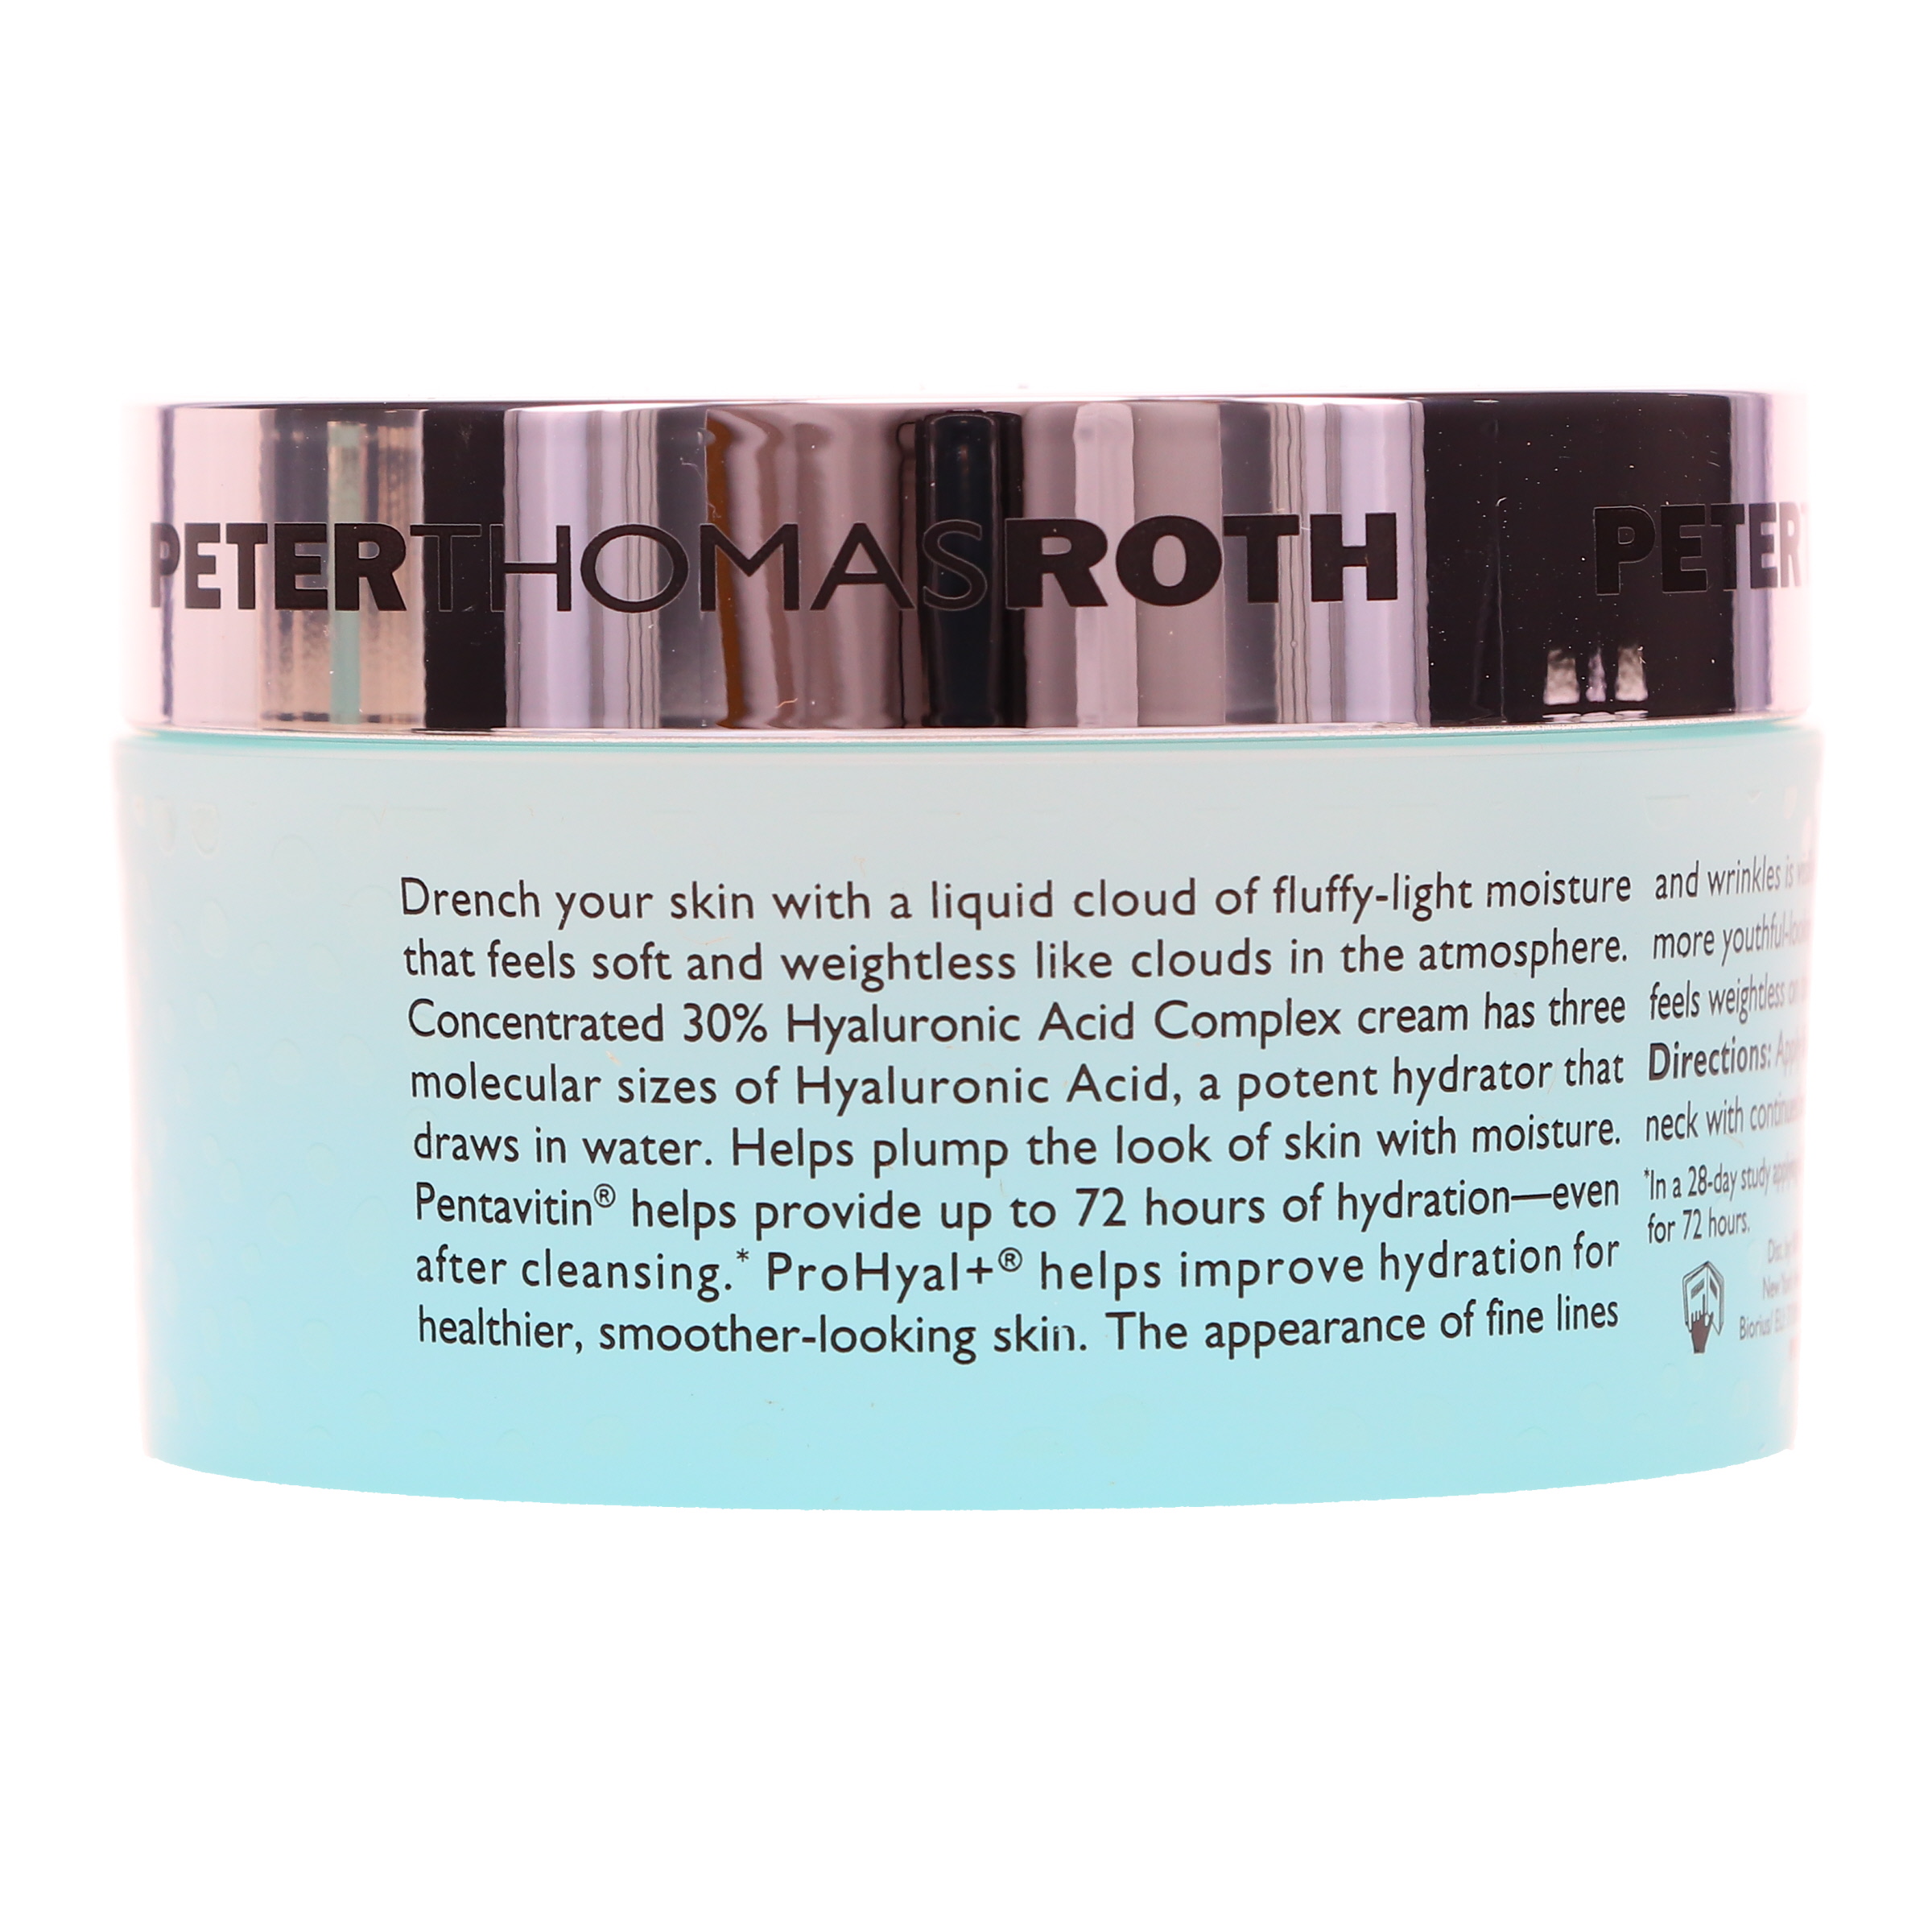 Peter Thomas Roth Water Drench Hyaluronic Cloud Cream 1.7 Hydrating Moisturizer - image 3 of 8